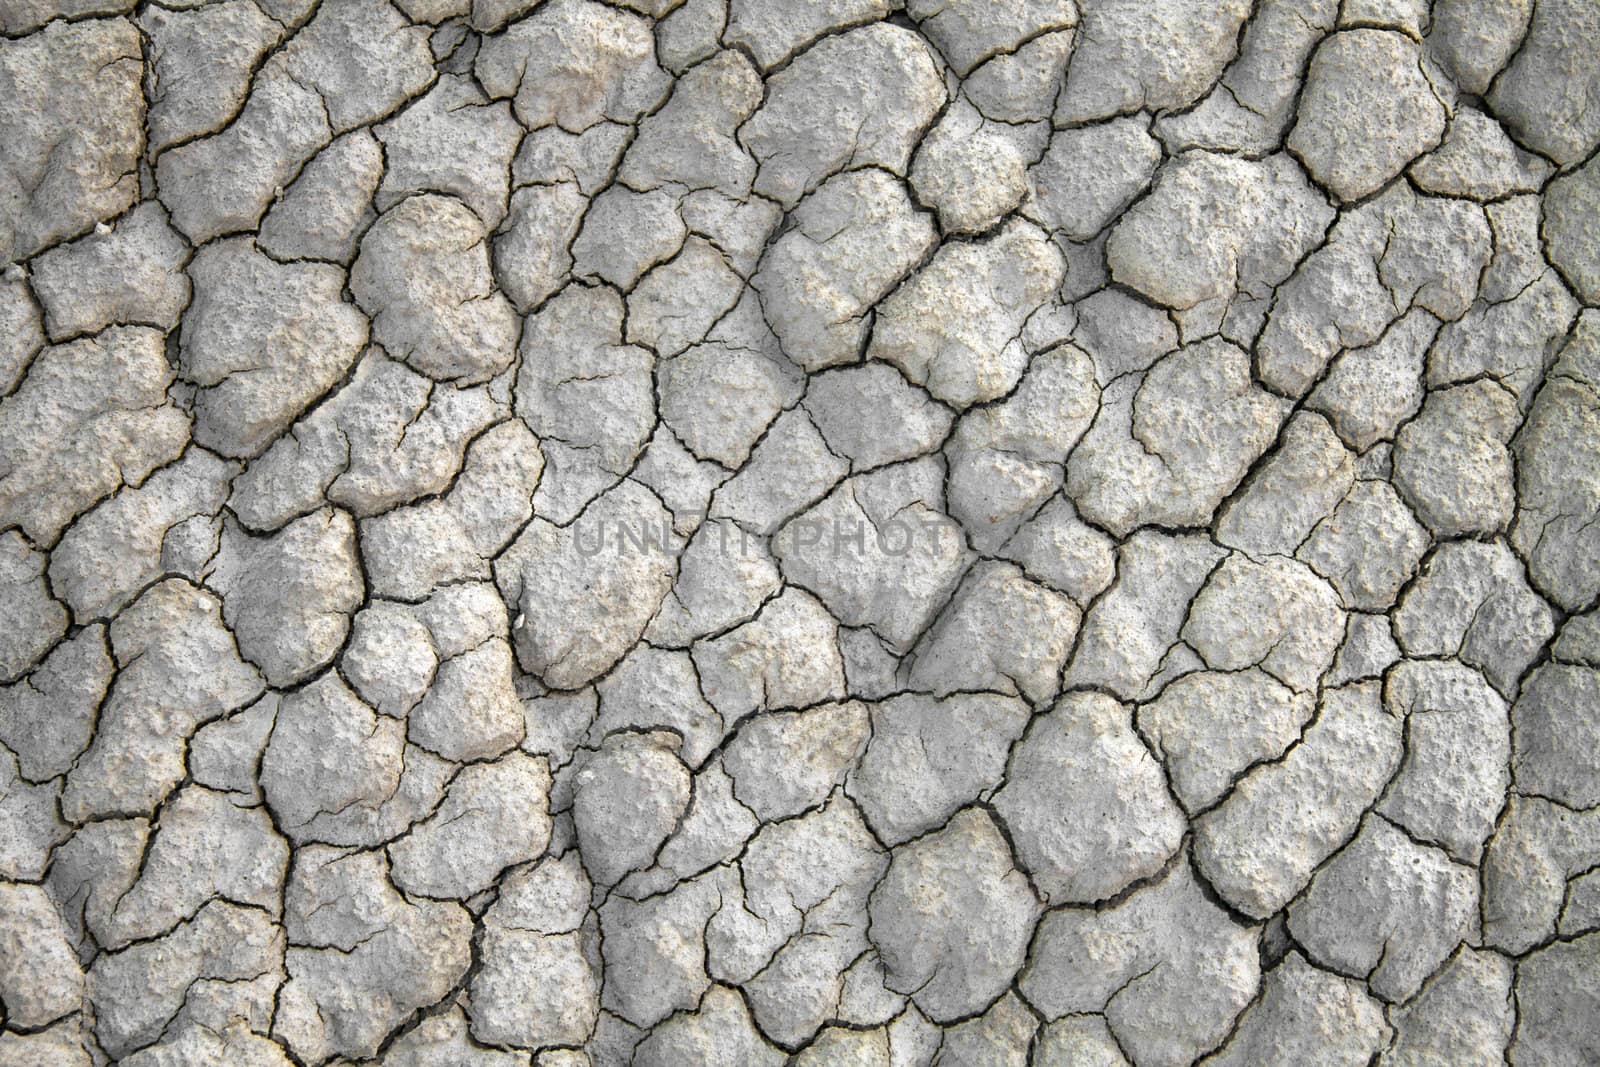 Dry cracked land by Lamarinx